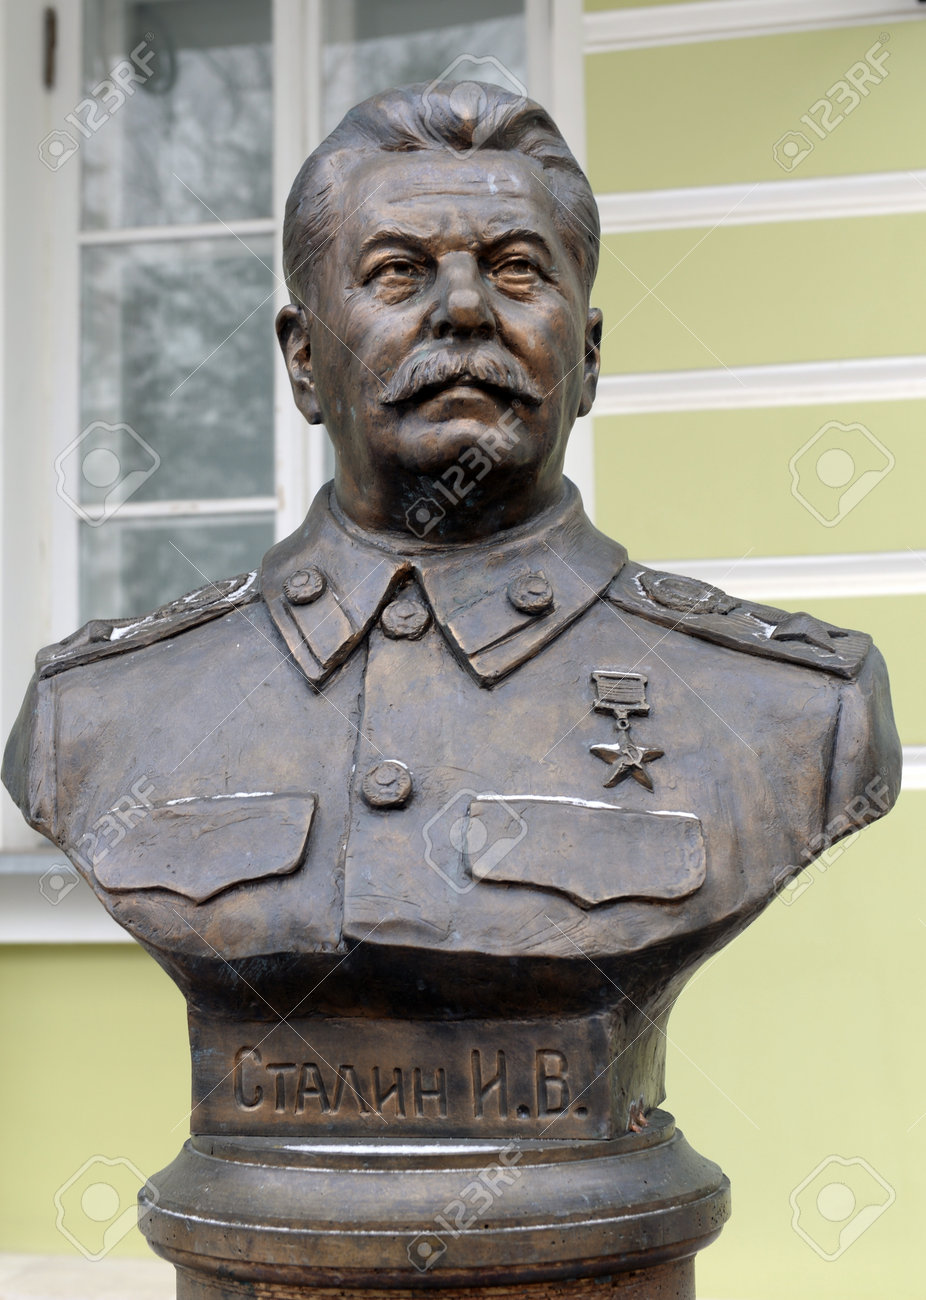 137287944-bust-of-joseph-stalin-on-the-avenue-of-rulers-in-moscow.jpg